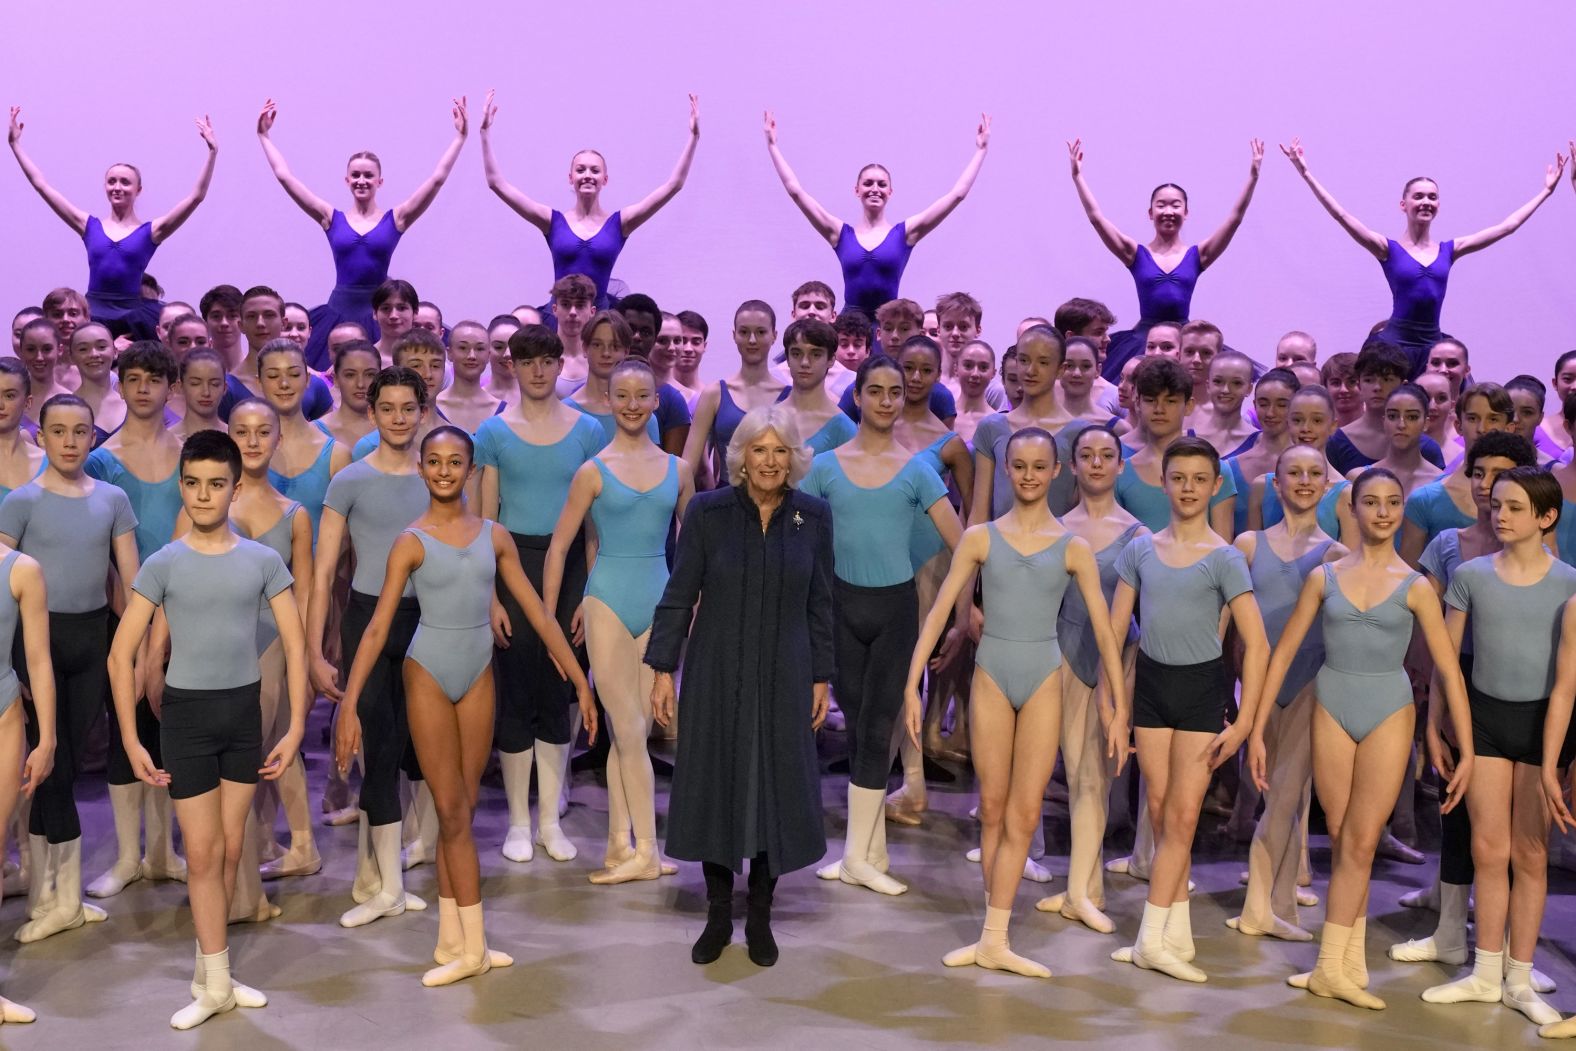 Camilla stands on stage with students during a visit to the Elmhurst Ballet School in Birmingham, England, in March 2023.